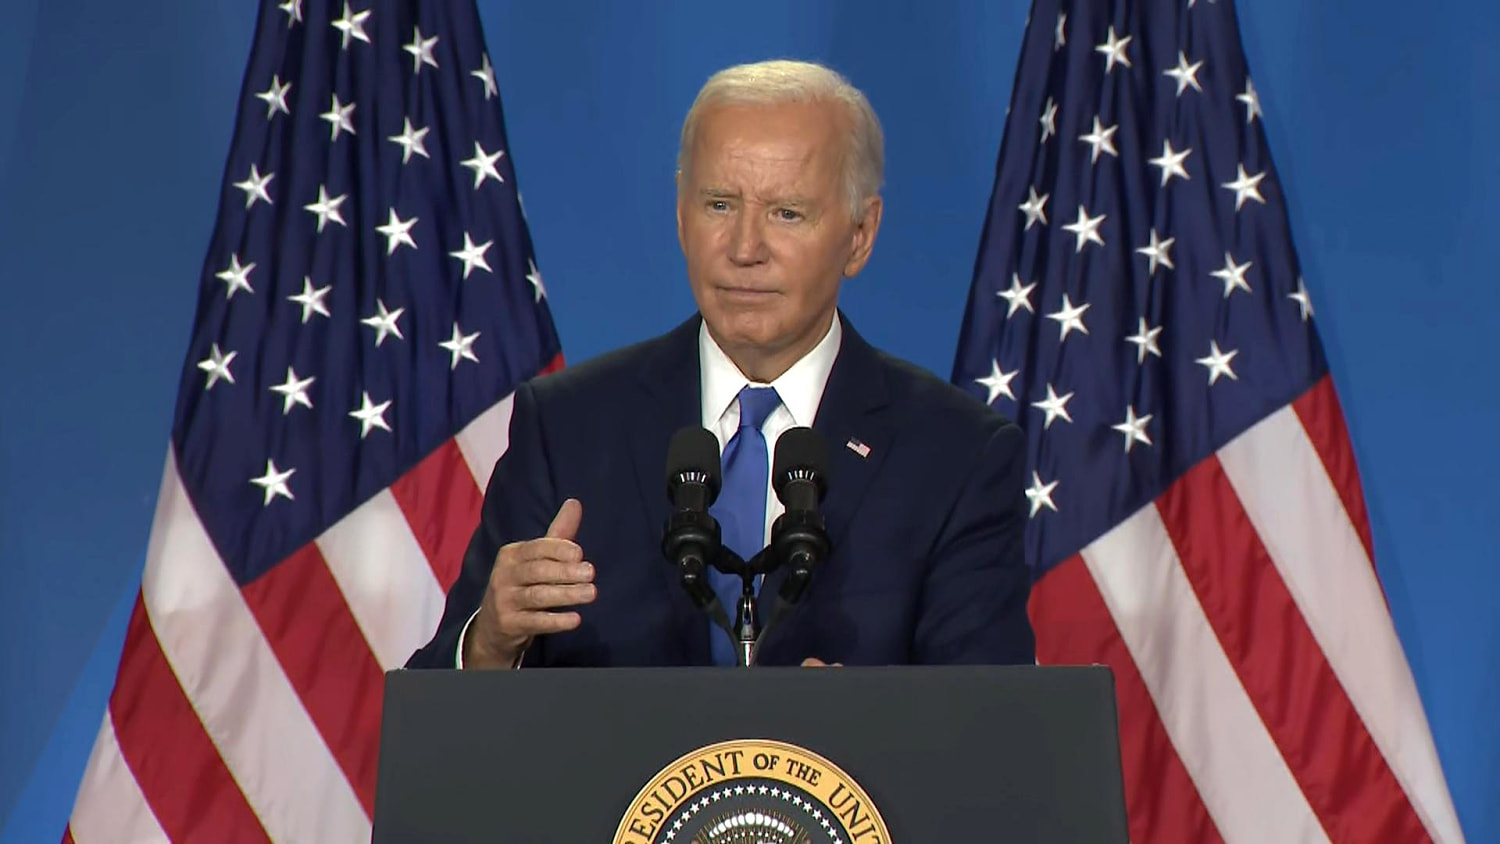 Biden news conference draws mixed reactions from anxious Dems